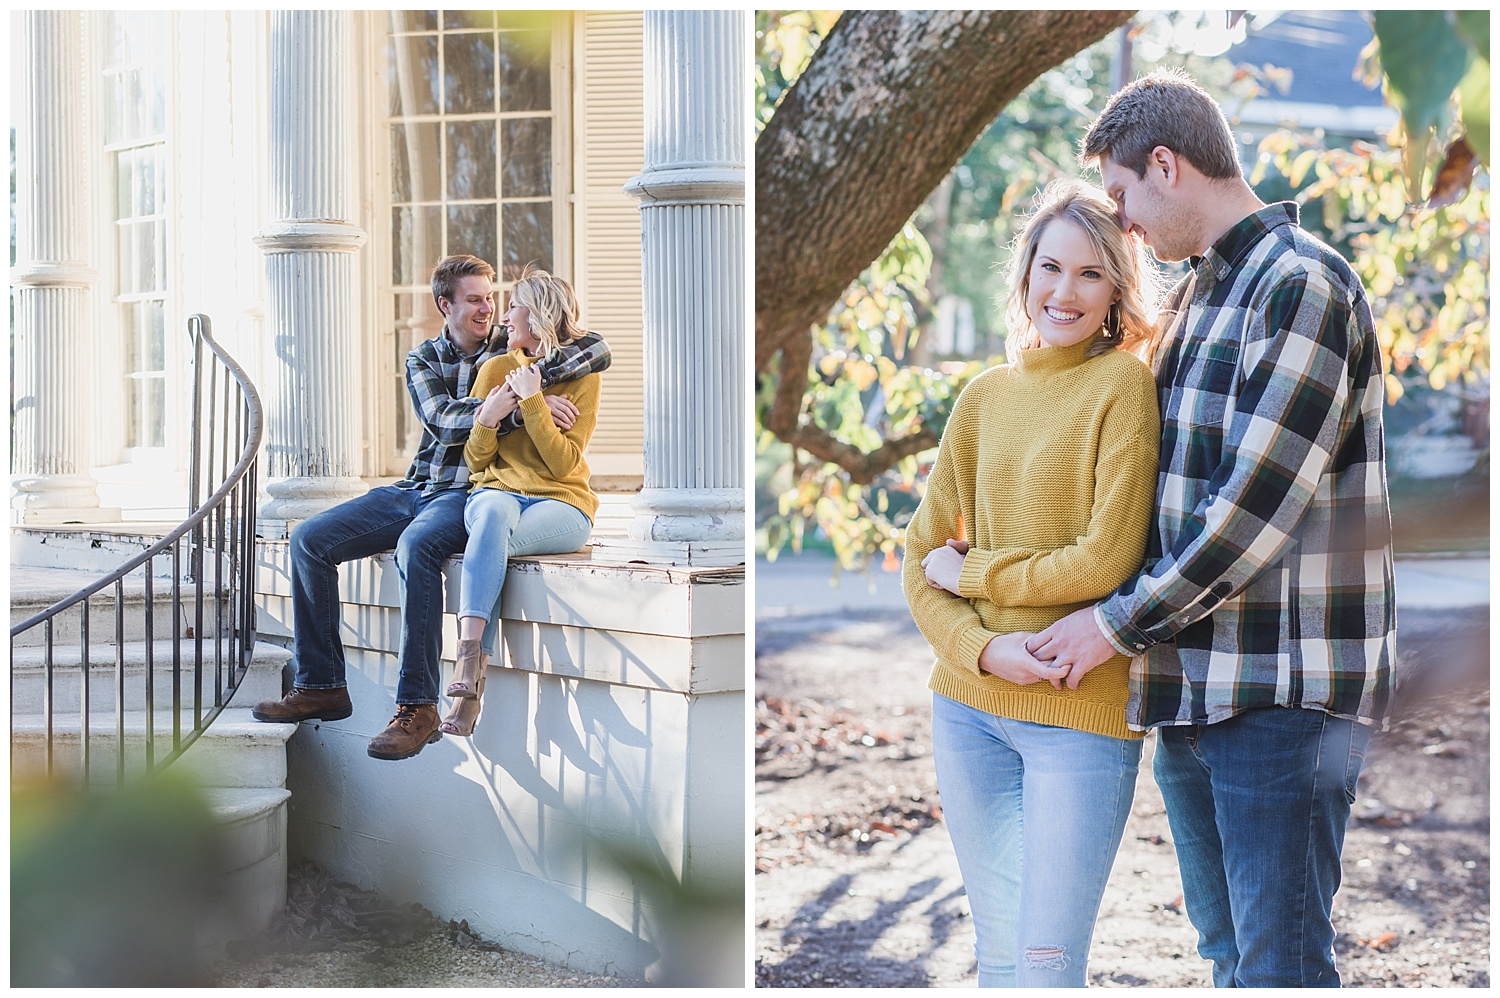 Violet Bank Engagement Photos - Virginia Wedding Photographer - Colonial Heights 